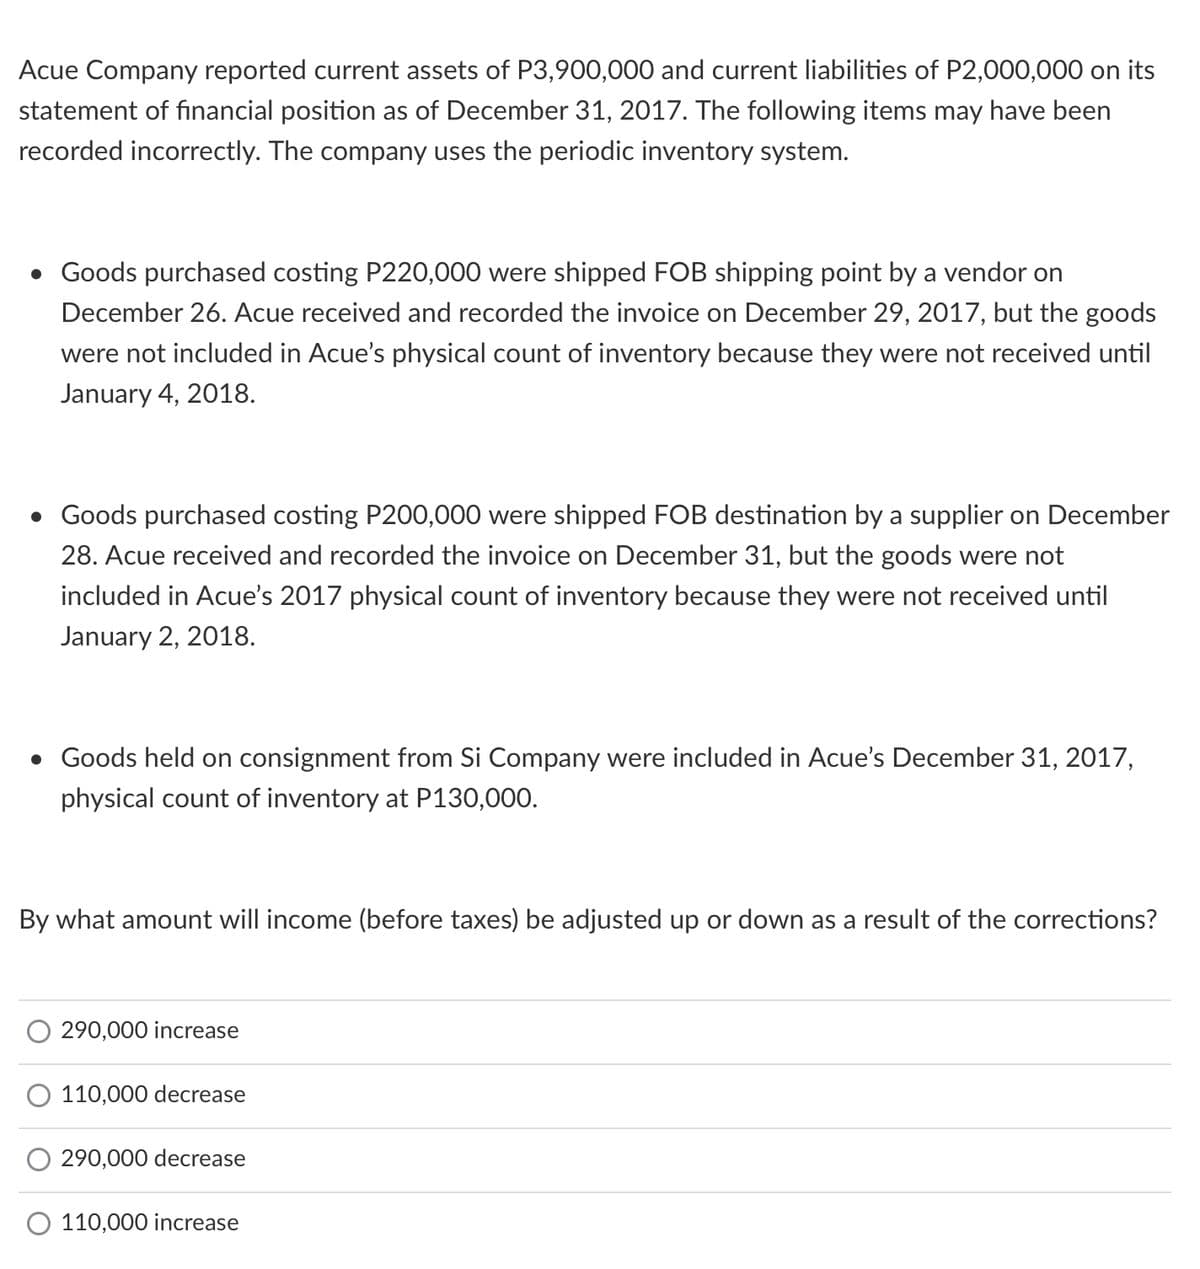 Acue Company reported current assets of P3,900,000 and current liabilities of P2,000,000 on its
statement of financial position as of December 31, 2017. The following items may have been
recorded incorrectly. The company uses the periodic inventory system.
Goods purchased costing P220,000 were shipped FOB shipping point by a vendor on
December 26. Acue received and recorded the invoice on December 29, 2017, but the goods
were not included in Acue's physical count of inventory because they were not received until
January 4, 2018.
• Goods purchased costing P200,000 were shipped FOB destination by a supplier on December
28. Acue received and recorded the invoice on December 31, but the goods were not
included in Acue's 2017 physical count of inventory because they were not received until
January 2, 2018.
• Goods held on consignment from Si Company were included in Acue's December 31, 2017,
physical count of inventory at P130,000.
By what amount will income (before taxes) be adjusted up or down as a result of the corrections?
O 290,000 increase
110,000 decrease
290,000 decrease
110,000 increase
